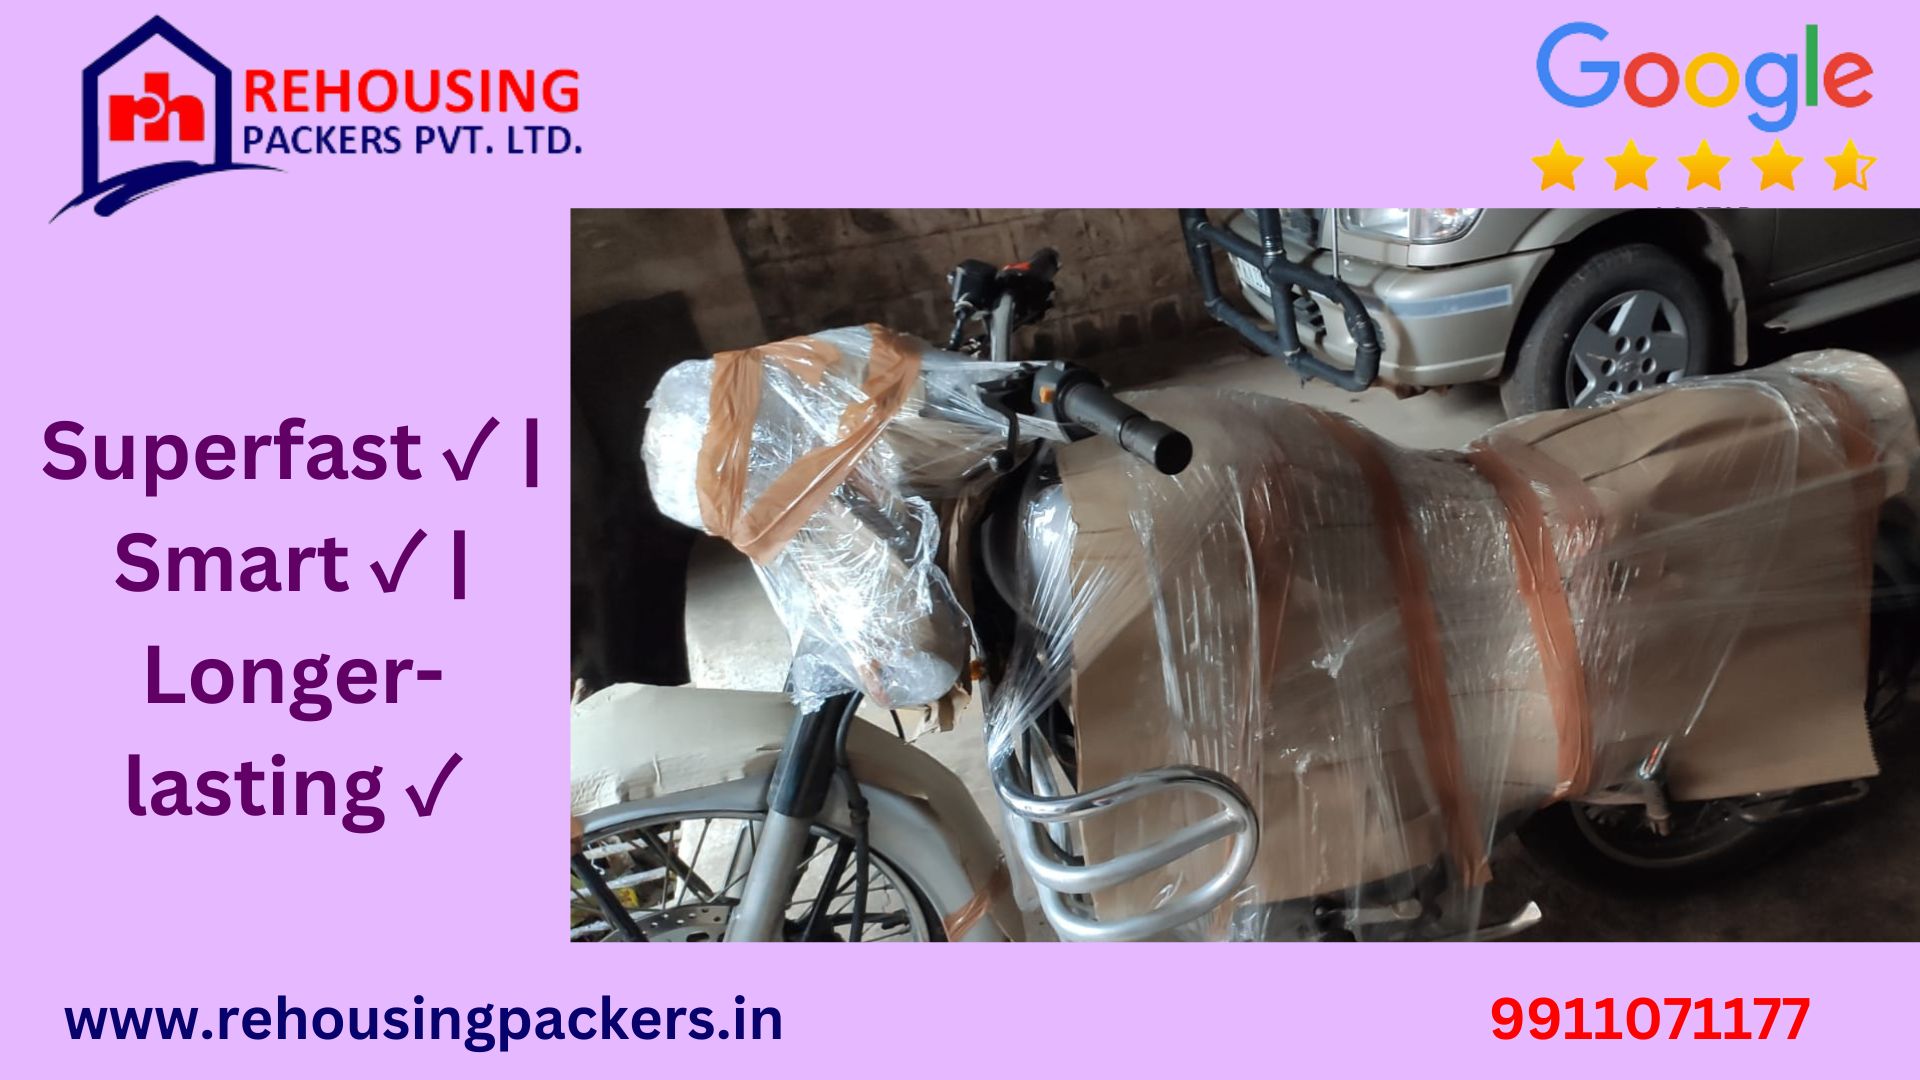 Our Expertise bike transportation services in Pune